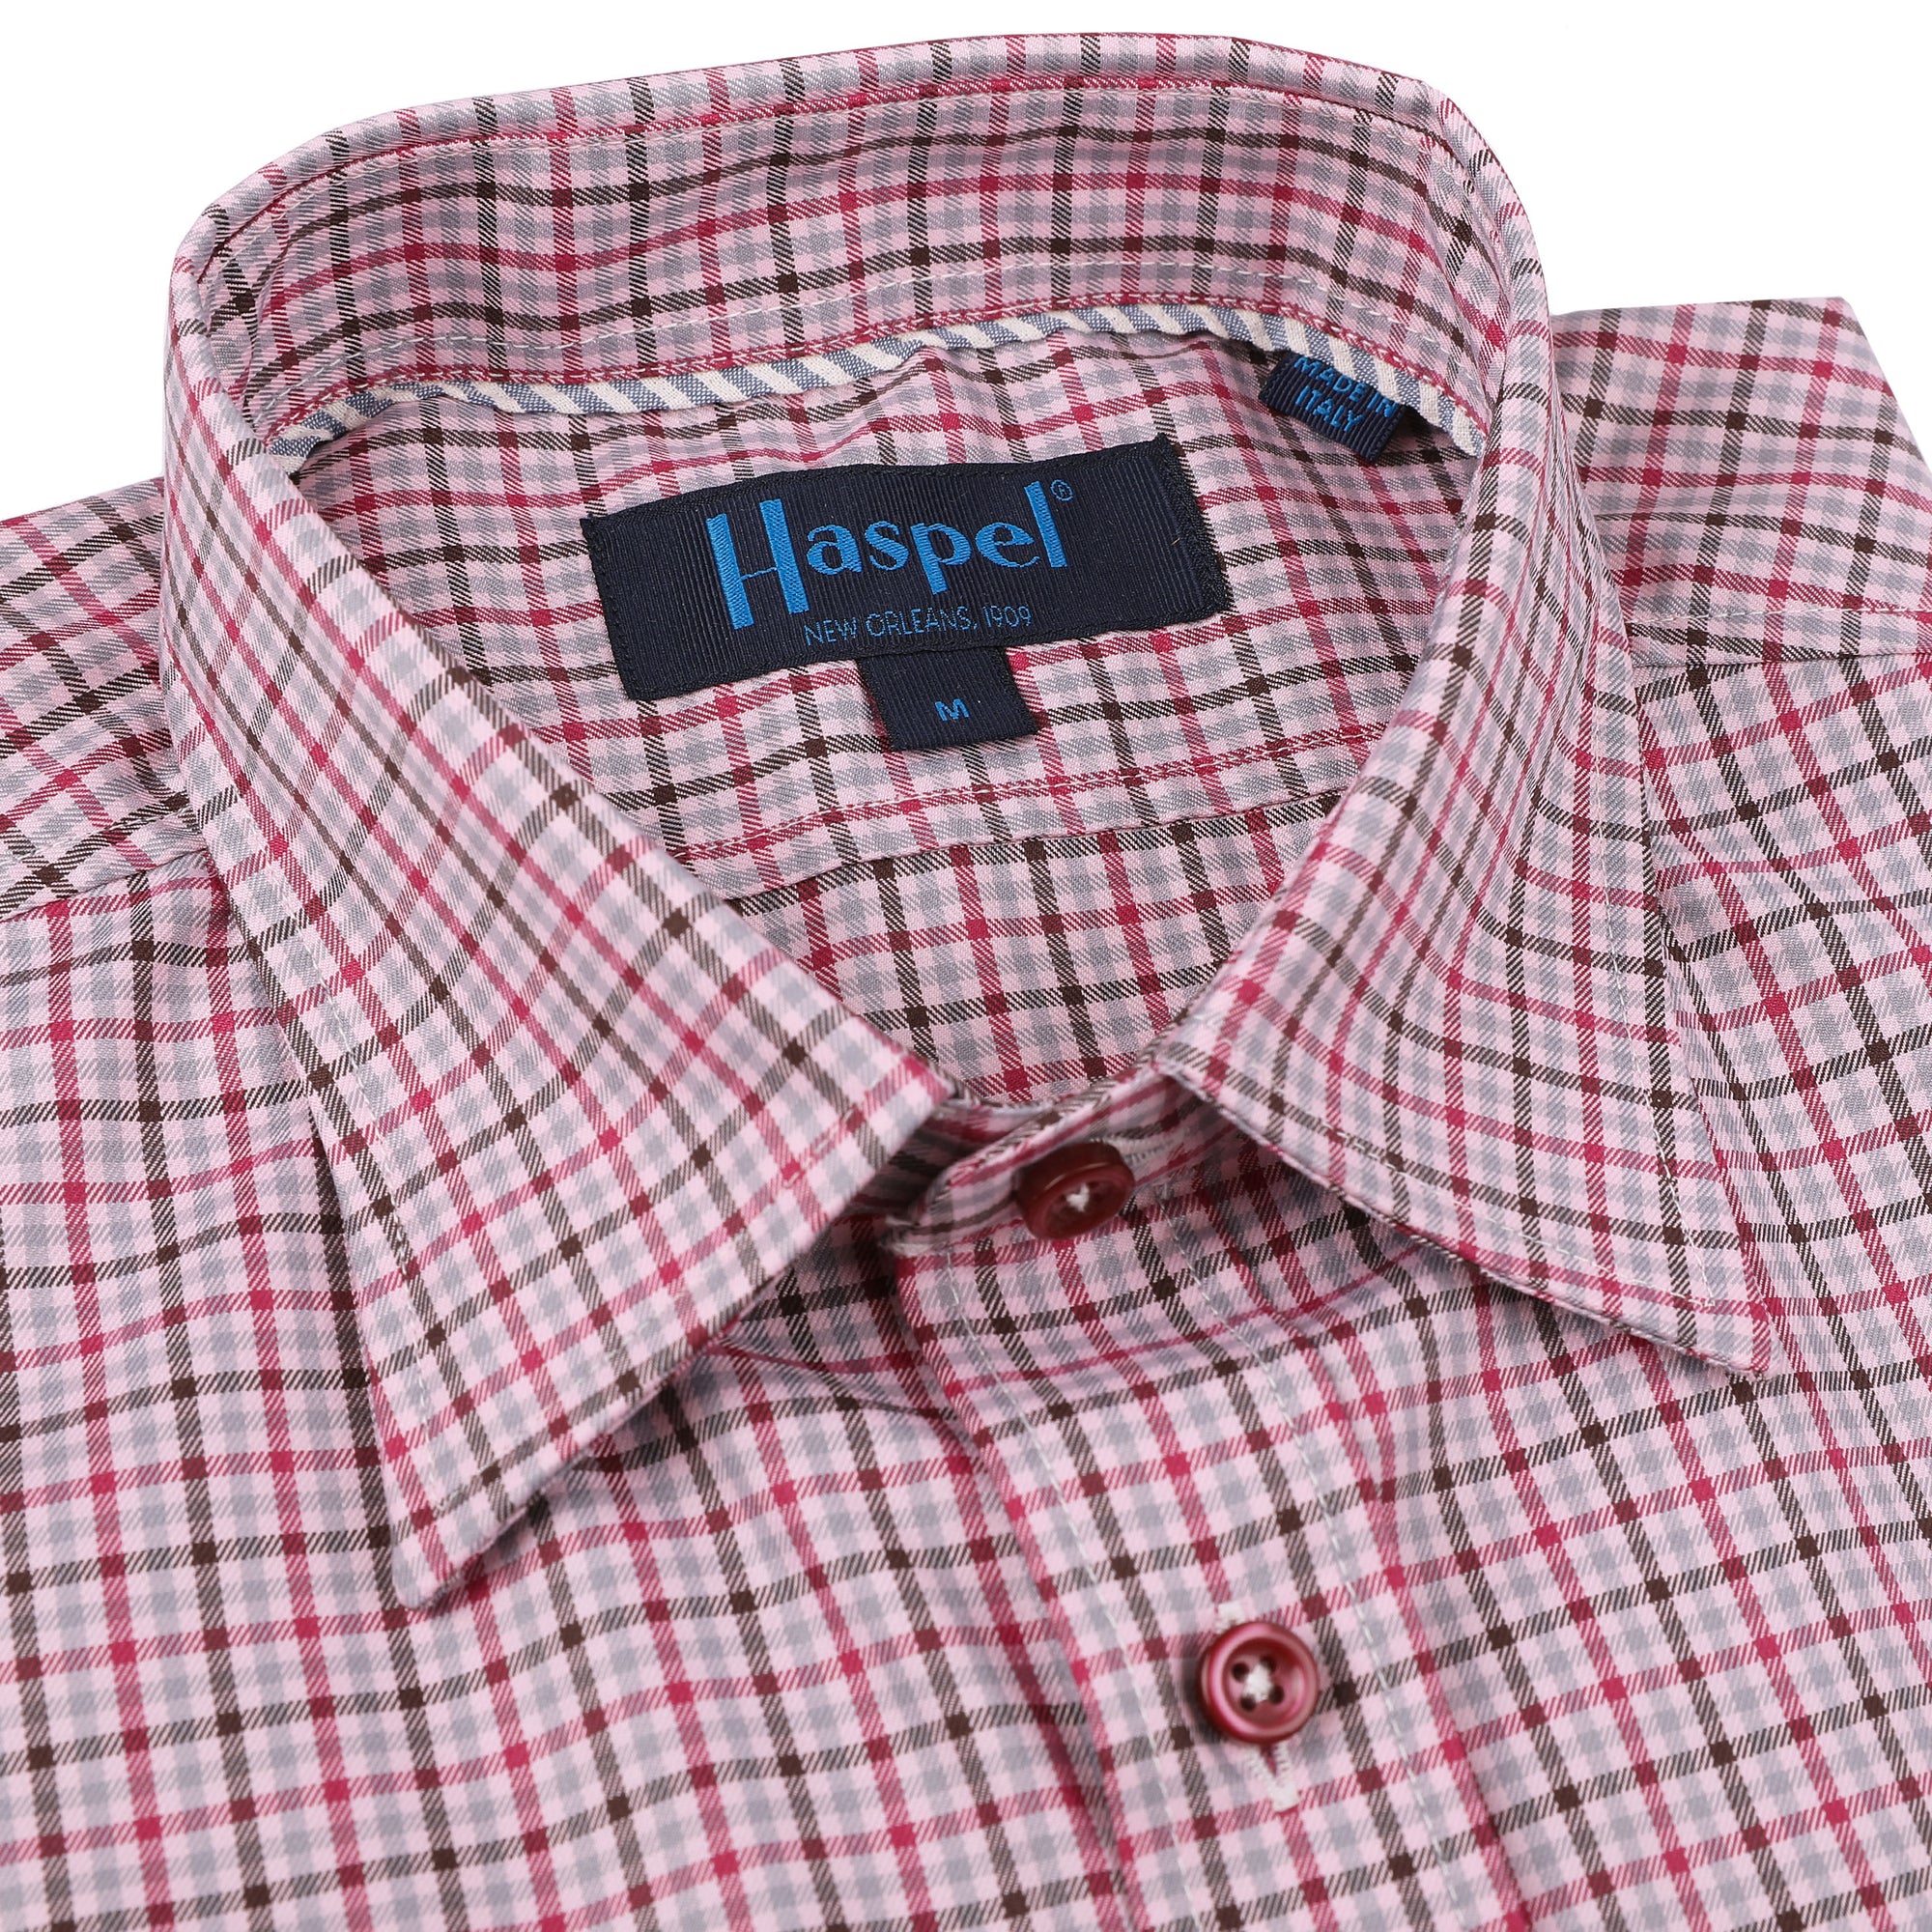 Treme's Rose Plaid shirt is perfect for adding a subtle hint of color to your outfit. Constructed of soft and breathable fabric, this classic shirt features a rose plaid design with rosy buttons, perfect for the fashionable dresser.  100% Cotton • Hidden Button Collar • Long Sleeve • Chest Pocket • Machine Washable • Made in Italy • Return Policy